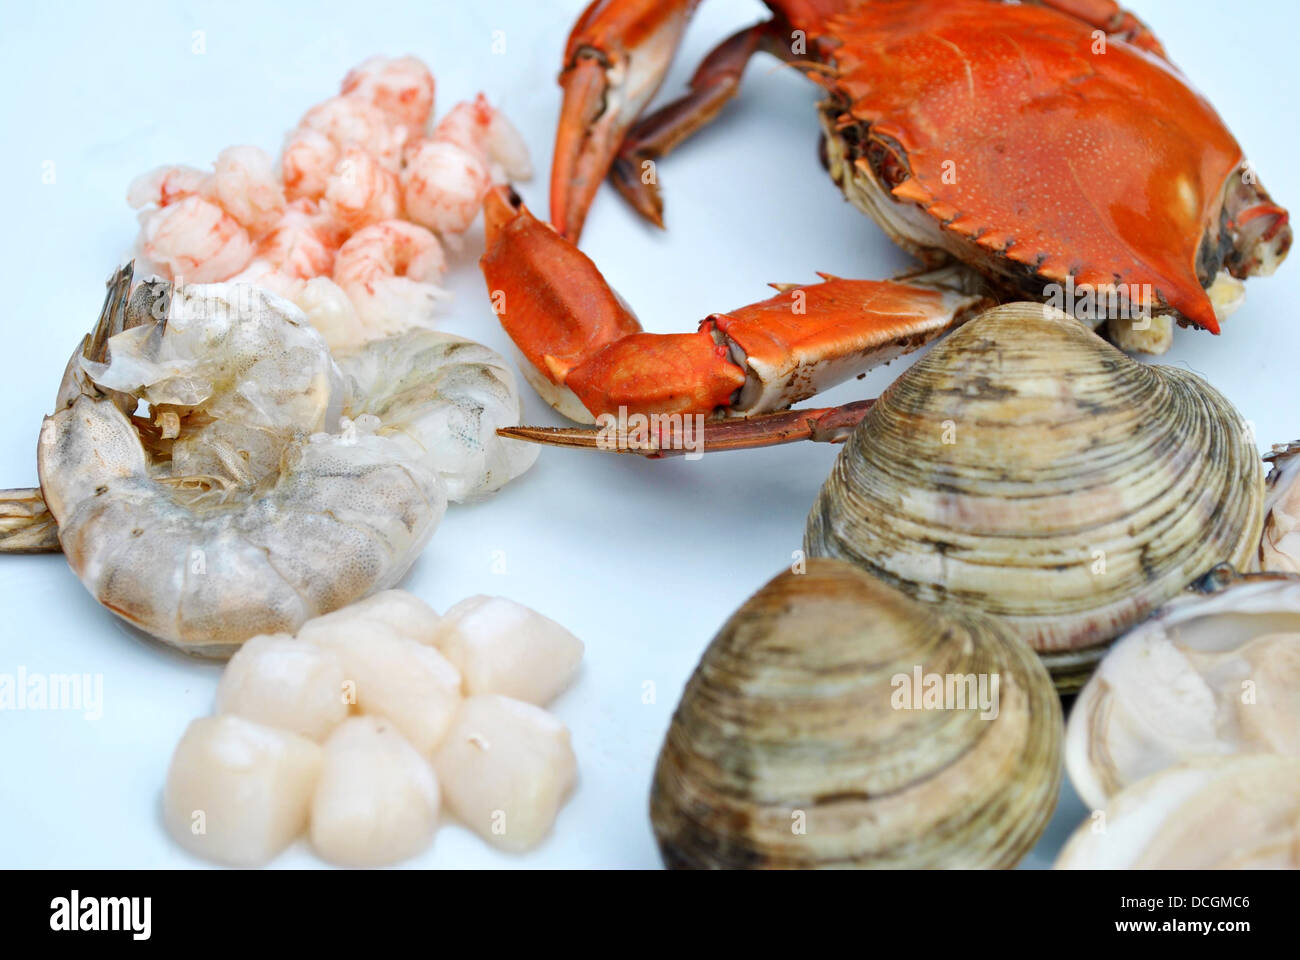 Different Types of Fresh Seafood Stock Photo